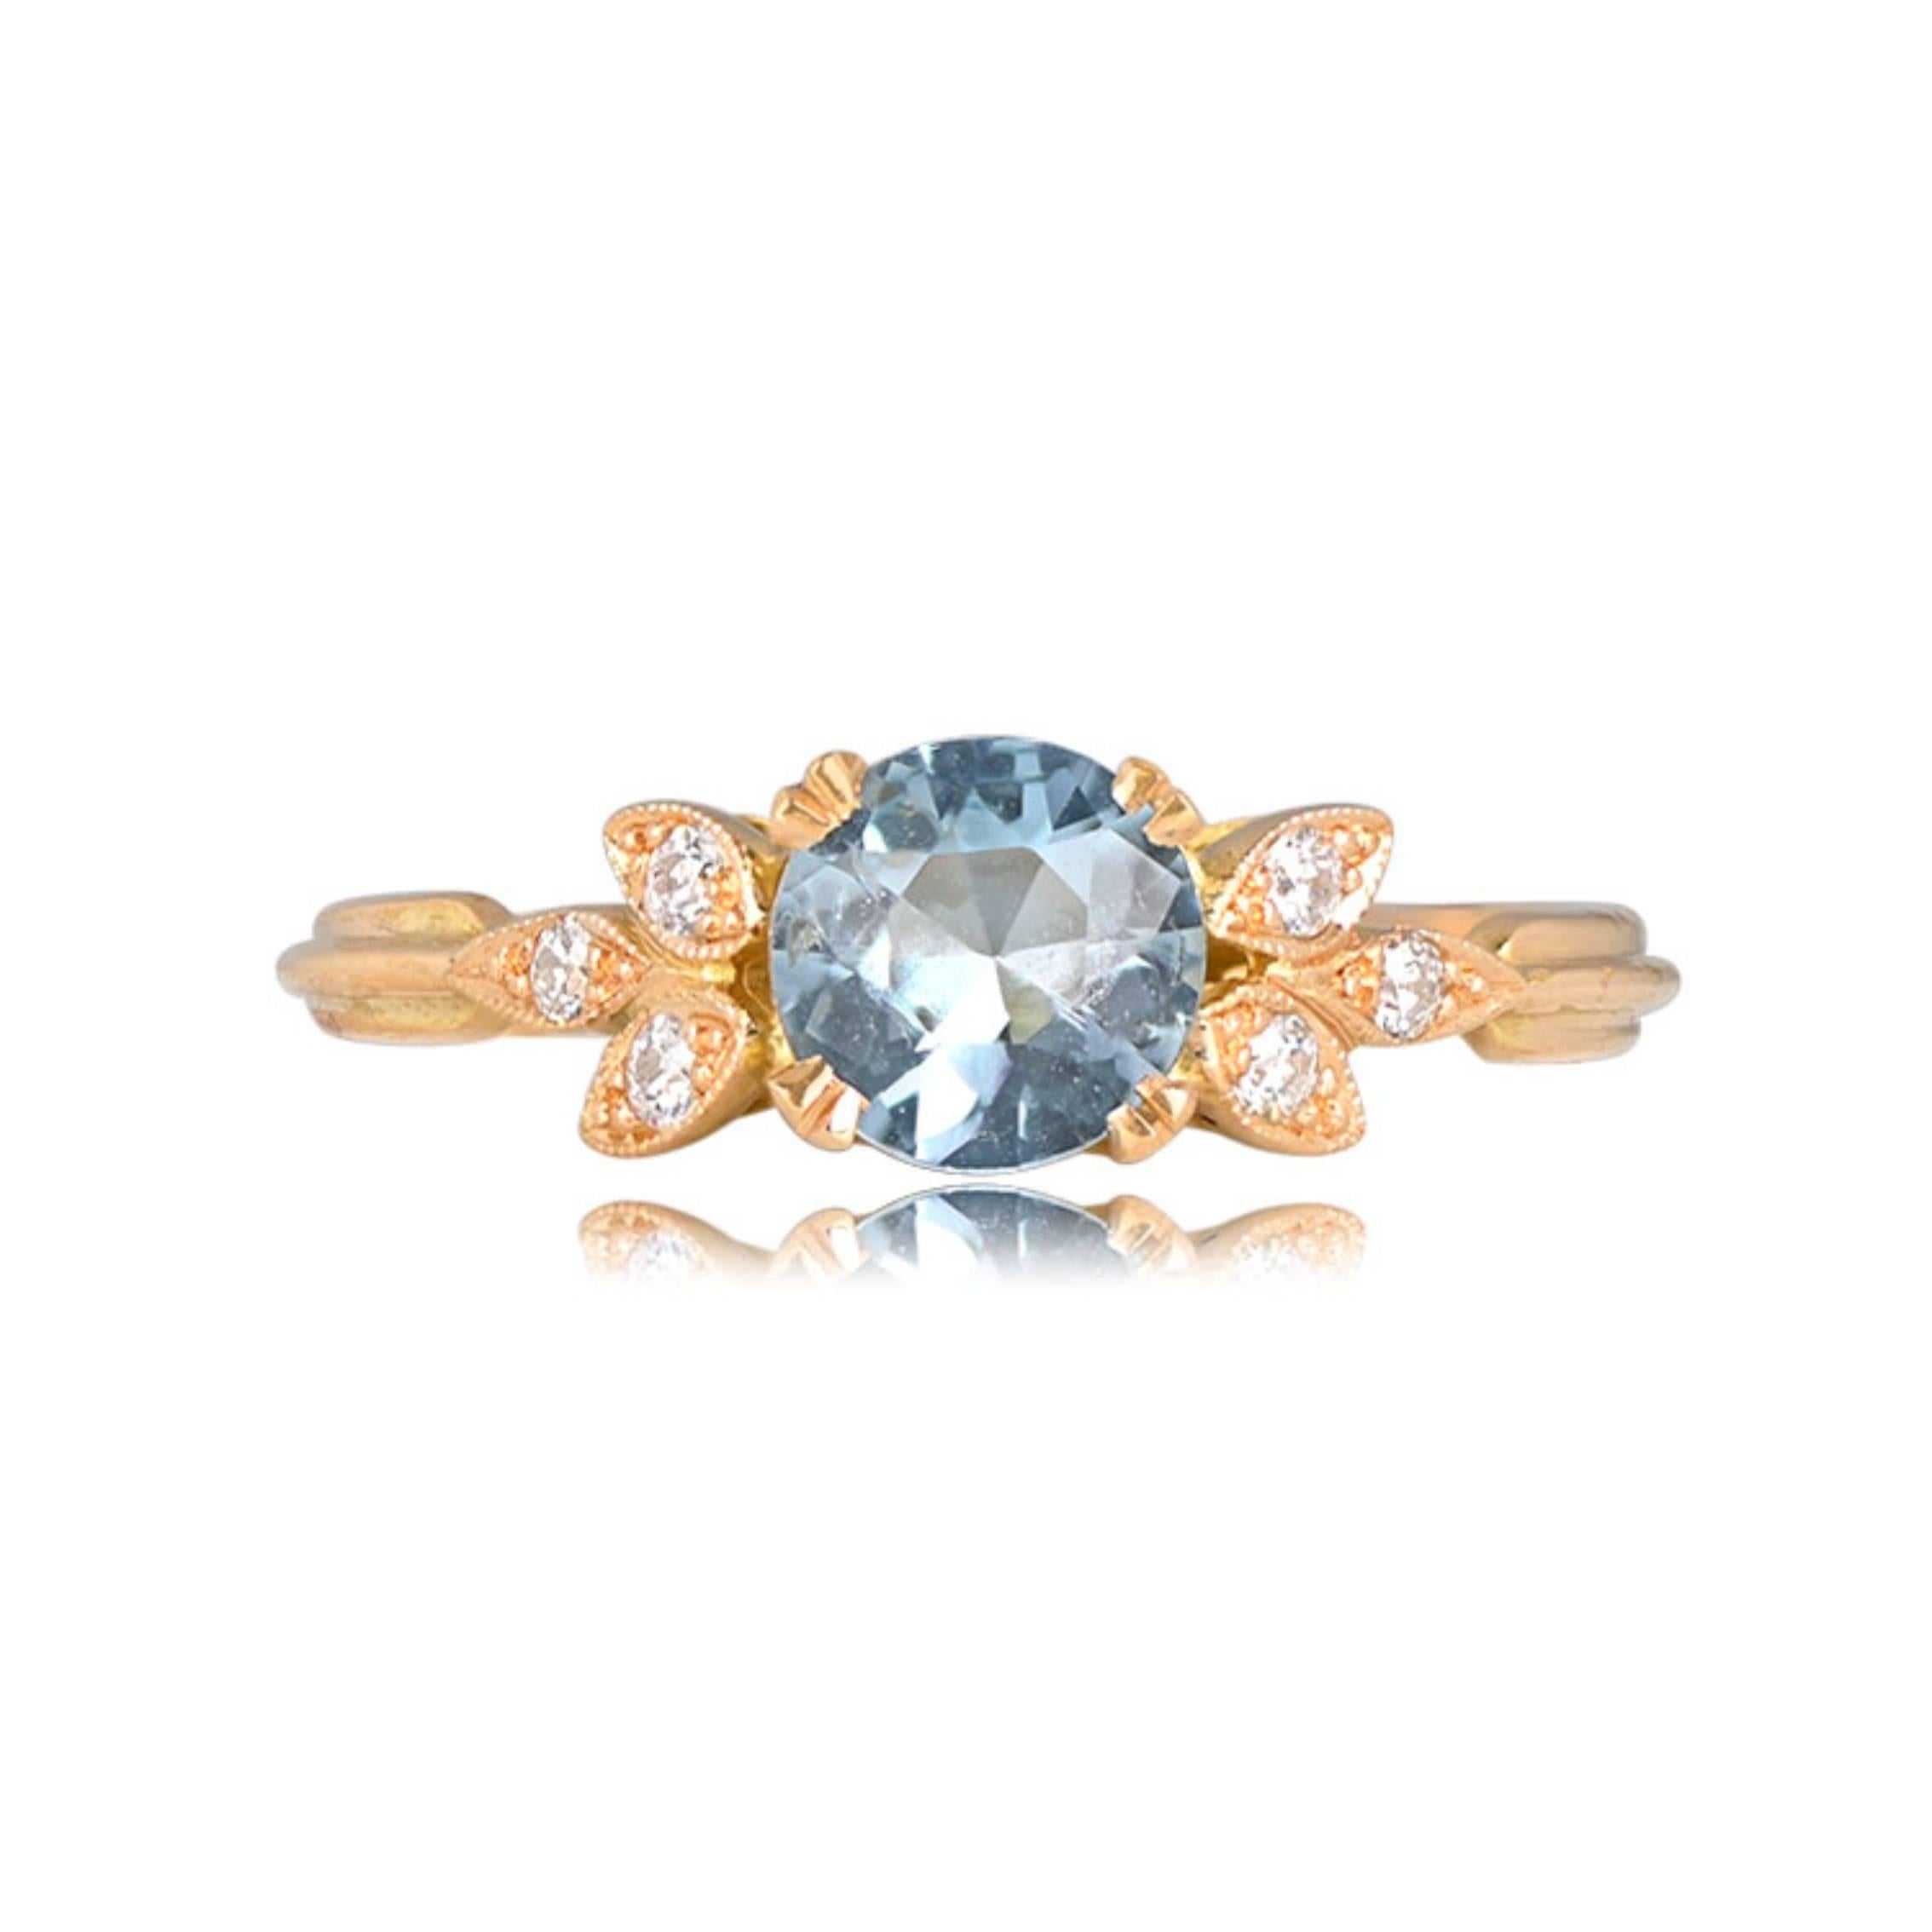 This 18k yellow gold gemstone engagement ring showcases a 6mm round aquamarine securely set in prongs, with the shoulders adorned by a leaf design featuring old European cut diamonds. The central aquamarine weighs about 0.72 carats. This ring has a